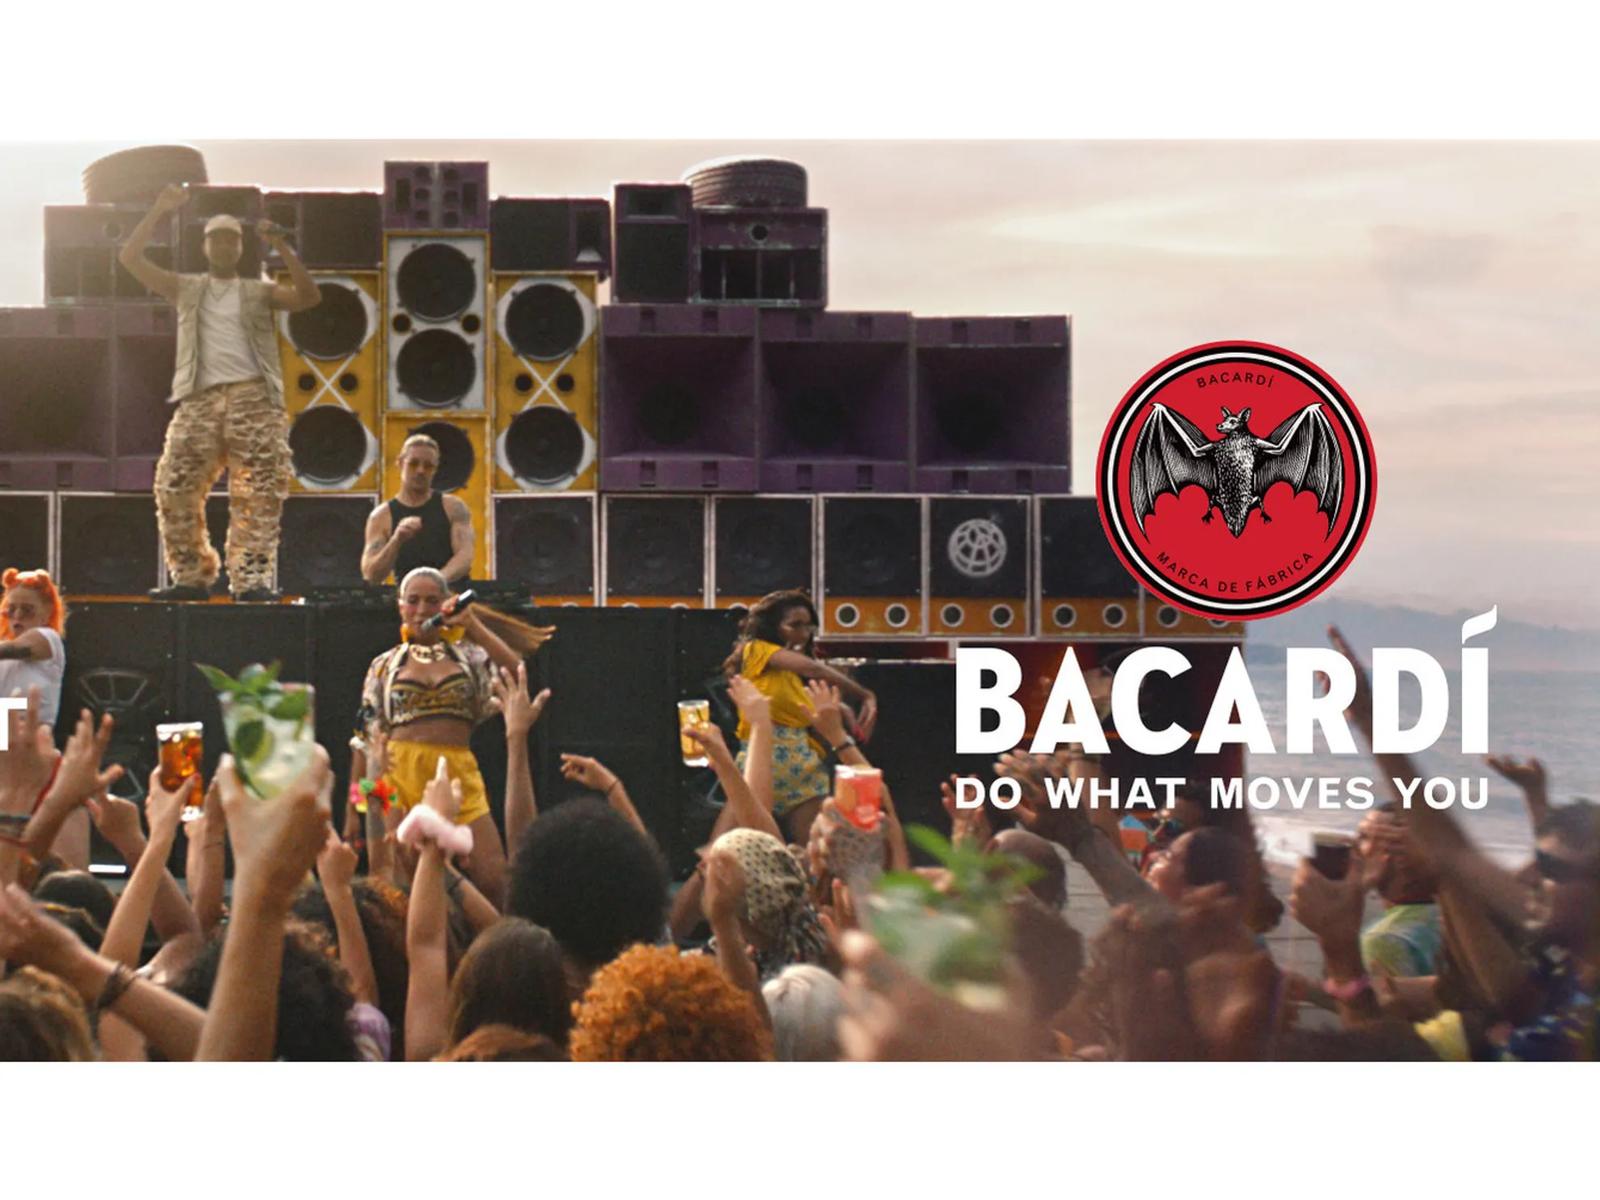 Bacardi: Do what moves you